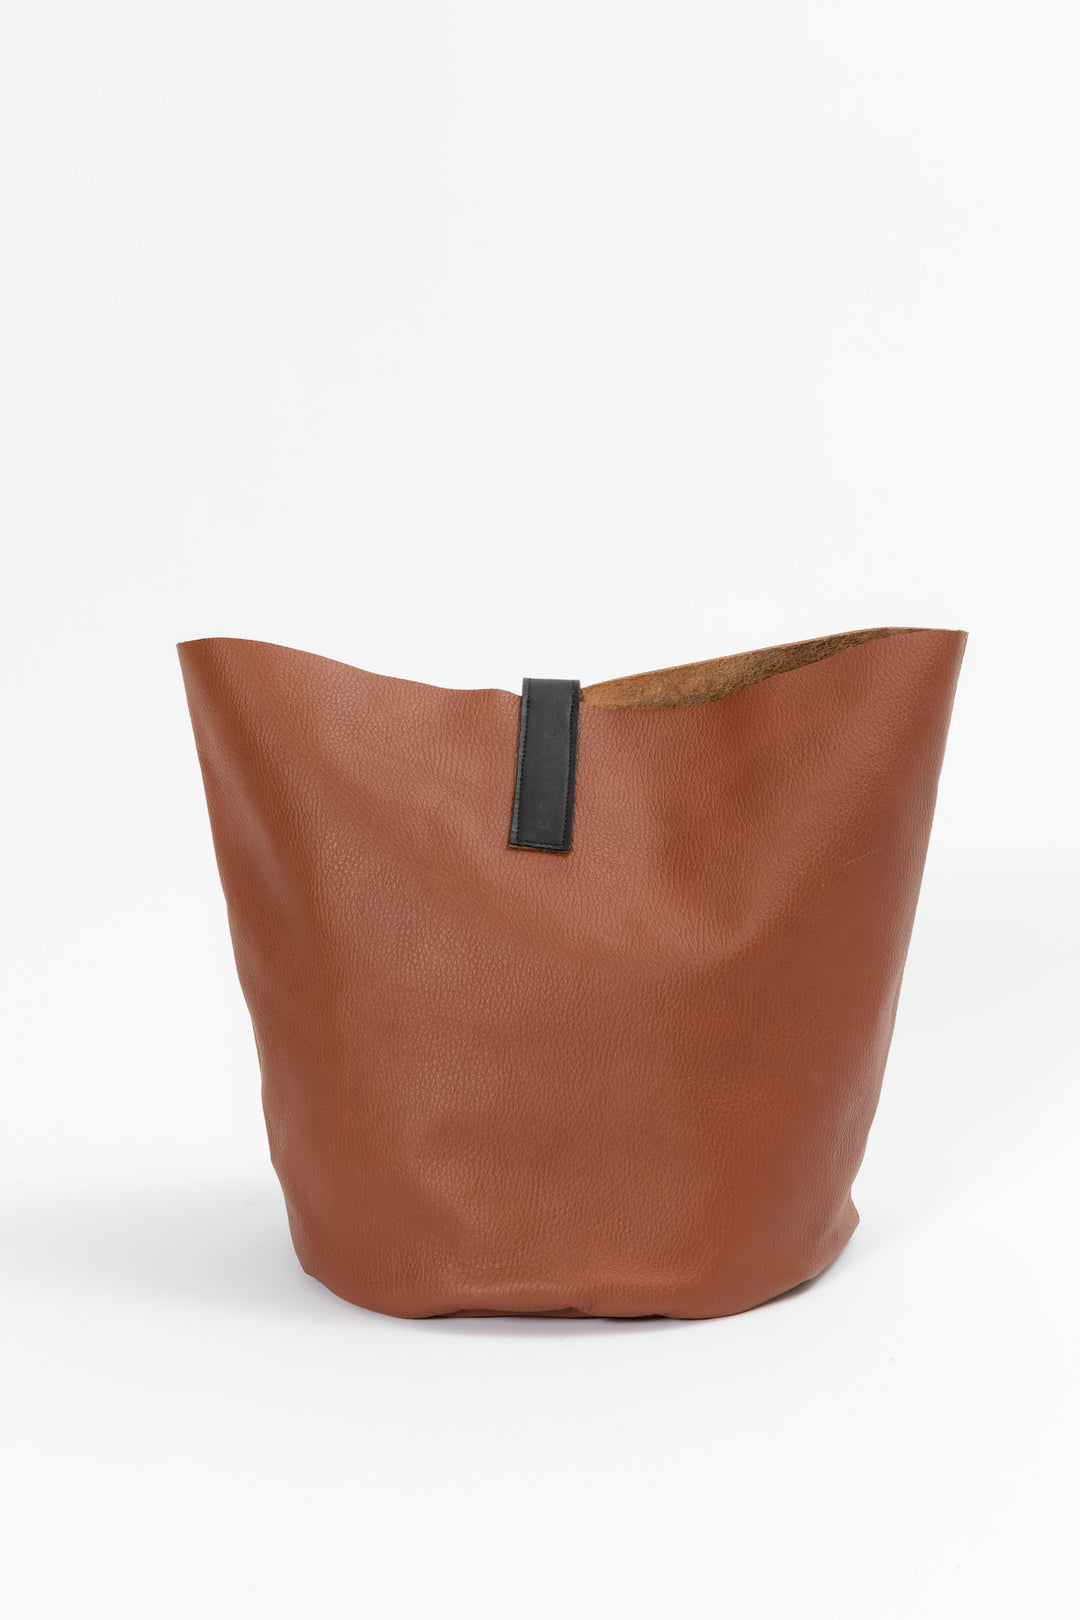 Hand Matters. Genuine leather bag